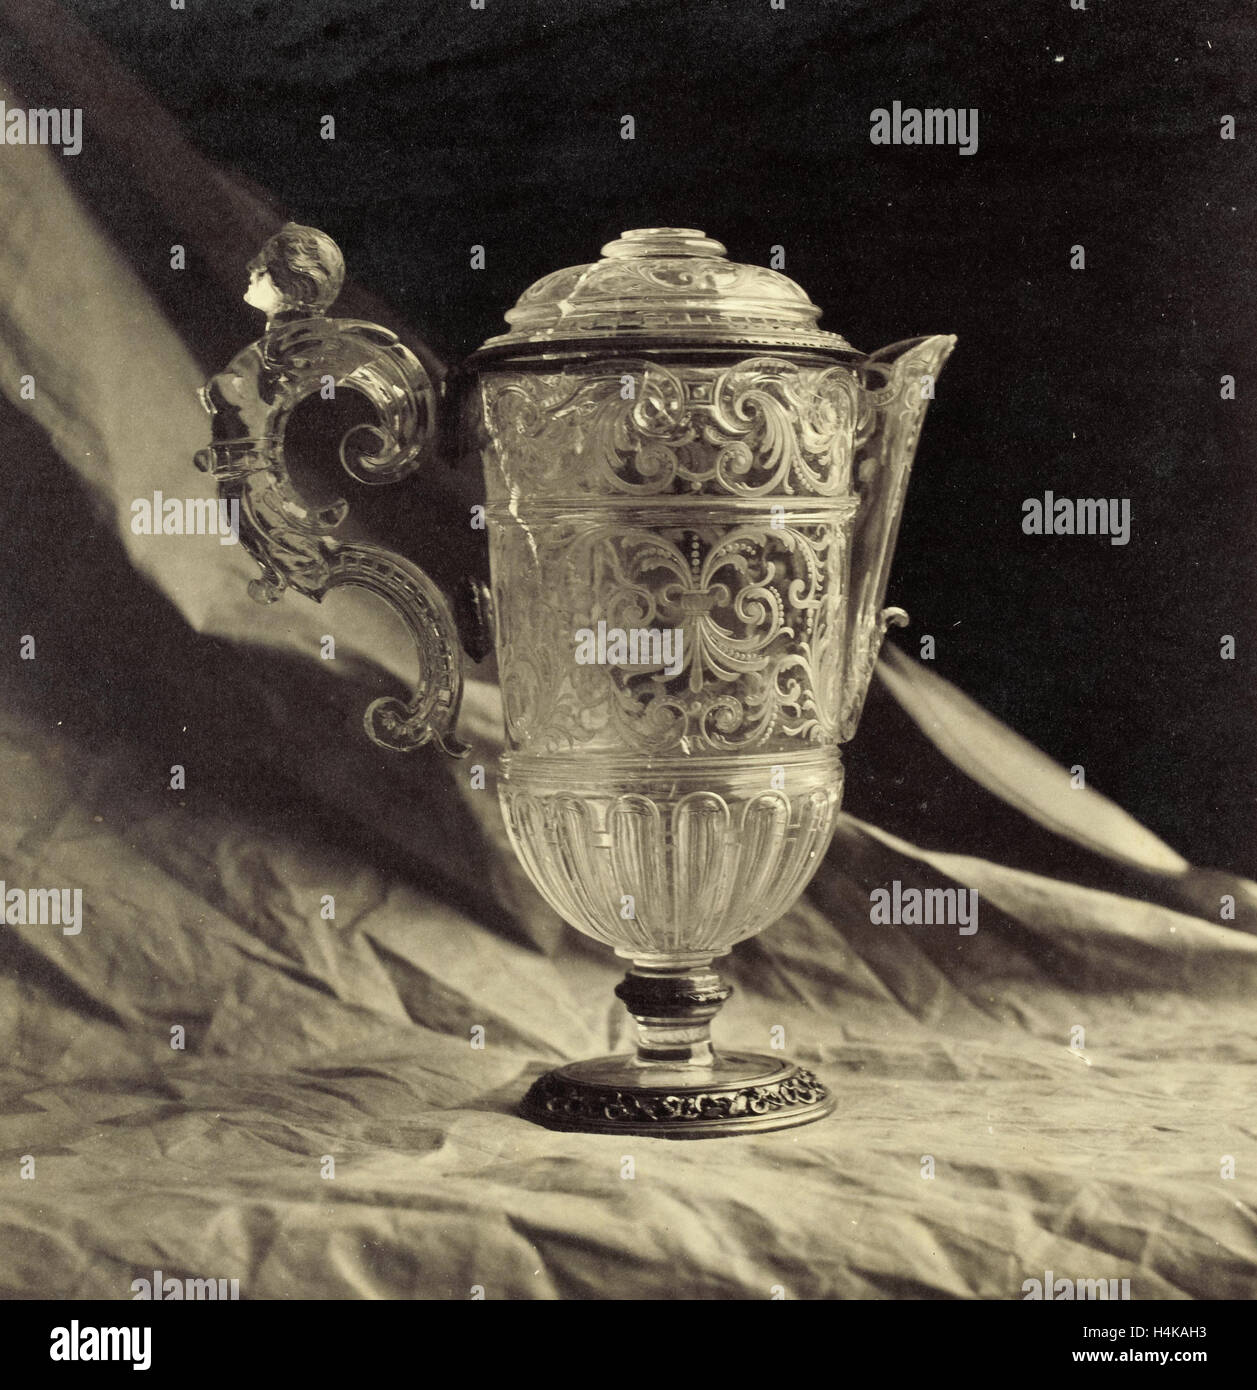 crystal decanter engraved with feminine handle, from the Louvre, Charles Thurston Thompson, c. 1866 - c. 1890 Stock Photo